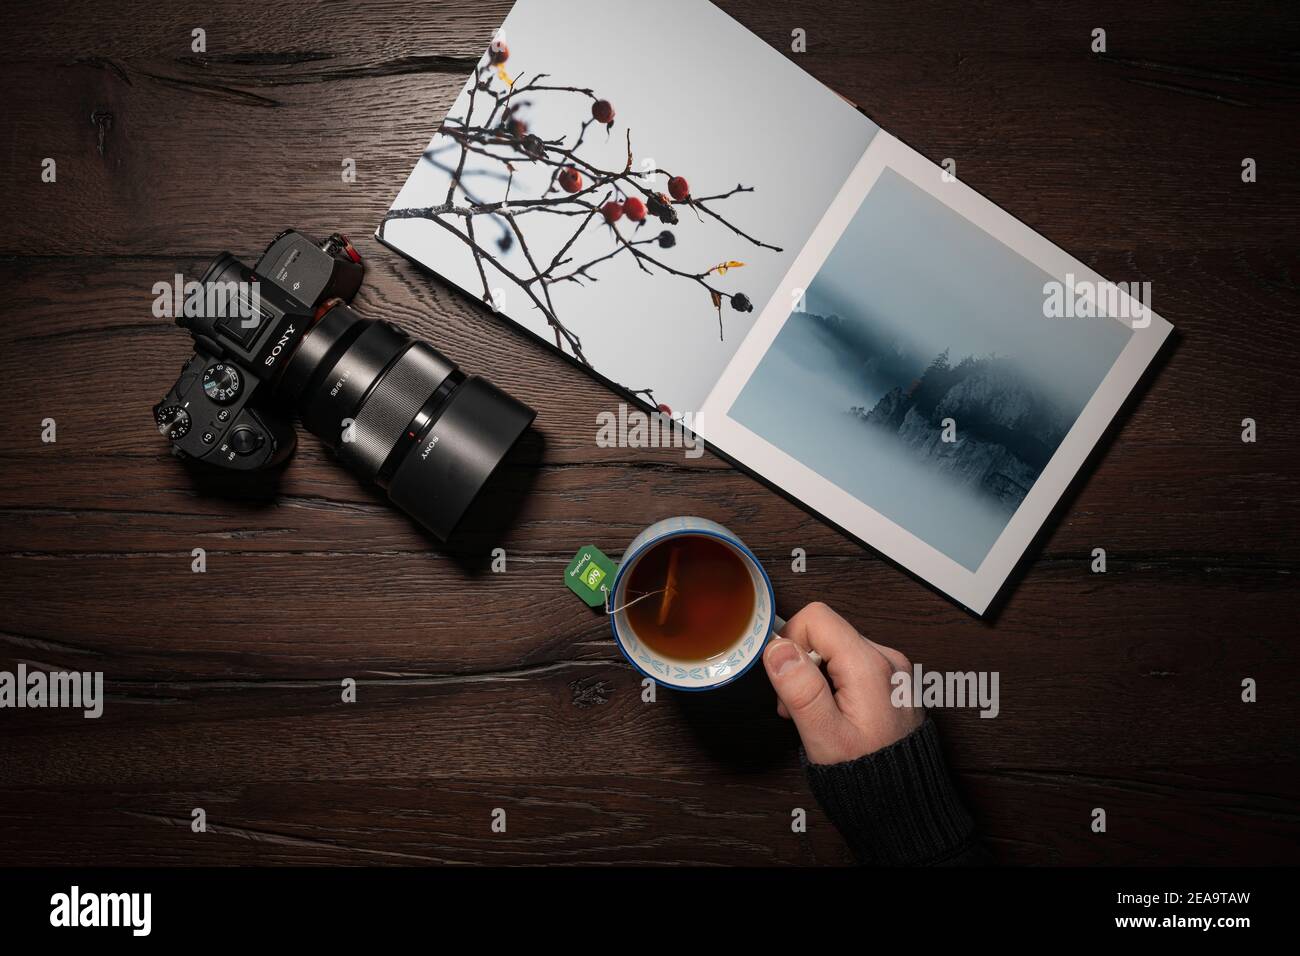 Scene, photo book on table with camera and teacup Stock Photo